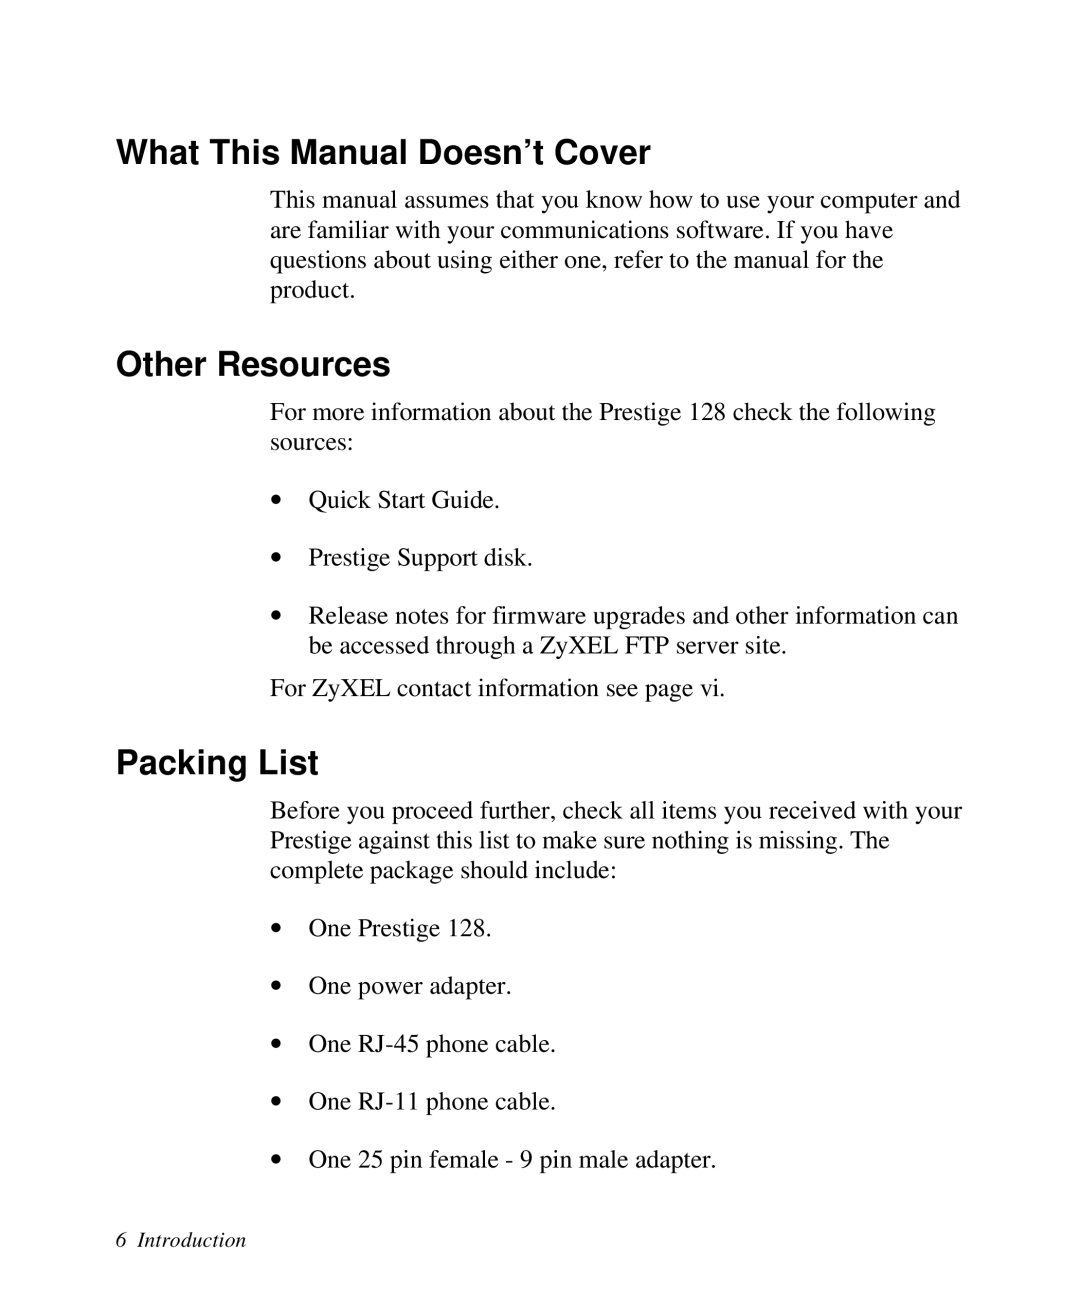 ZyXEL Communications Prestige 128 user manual What This Manual Doesn’t Cover, Other Resources, Packing List 